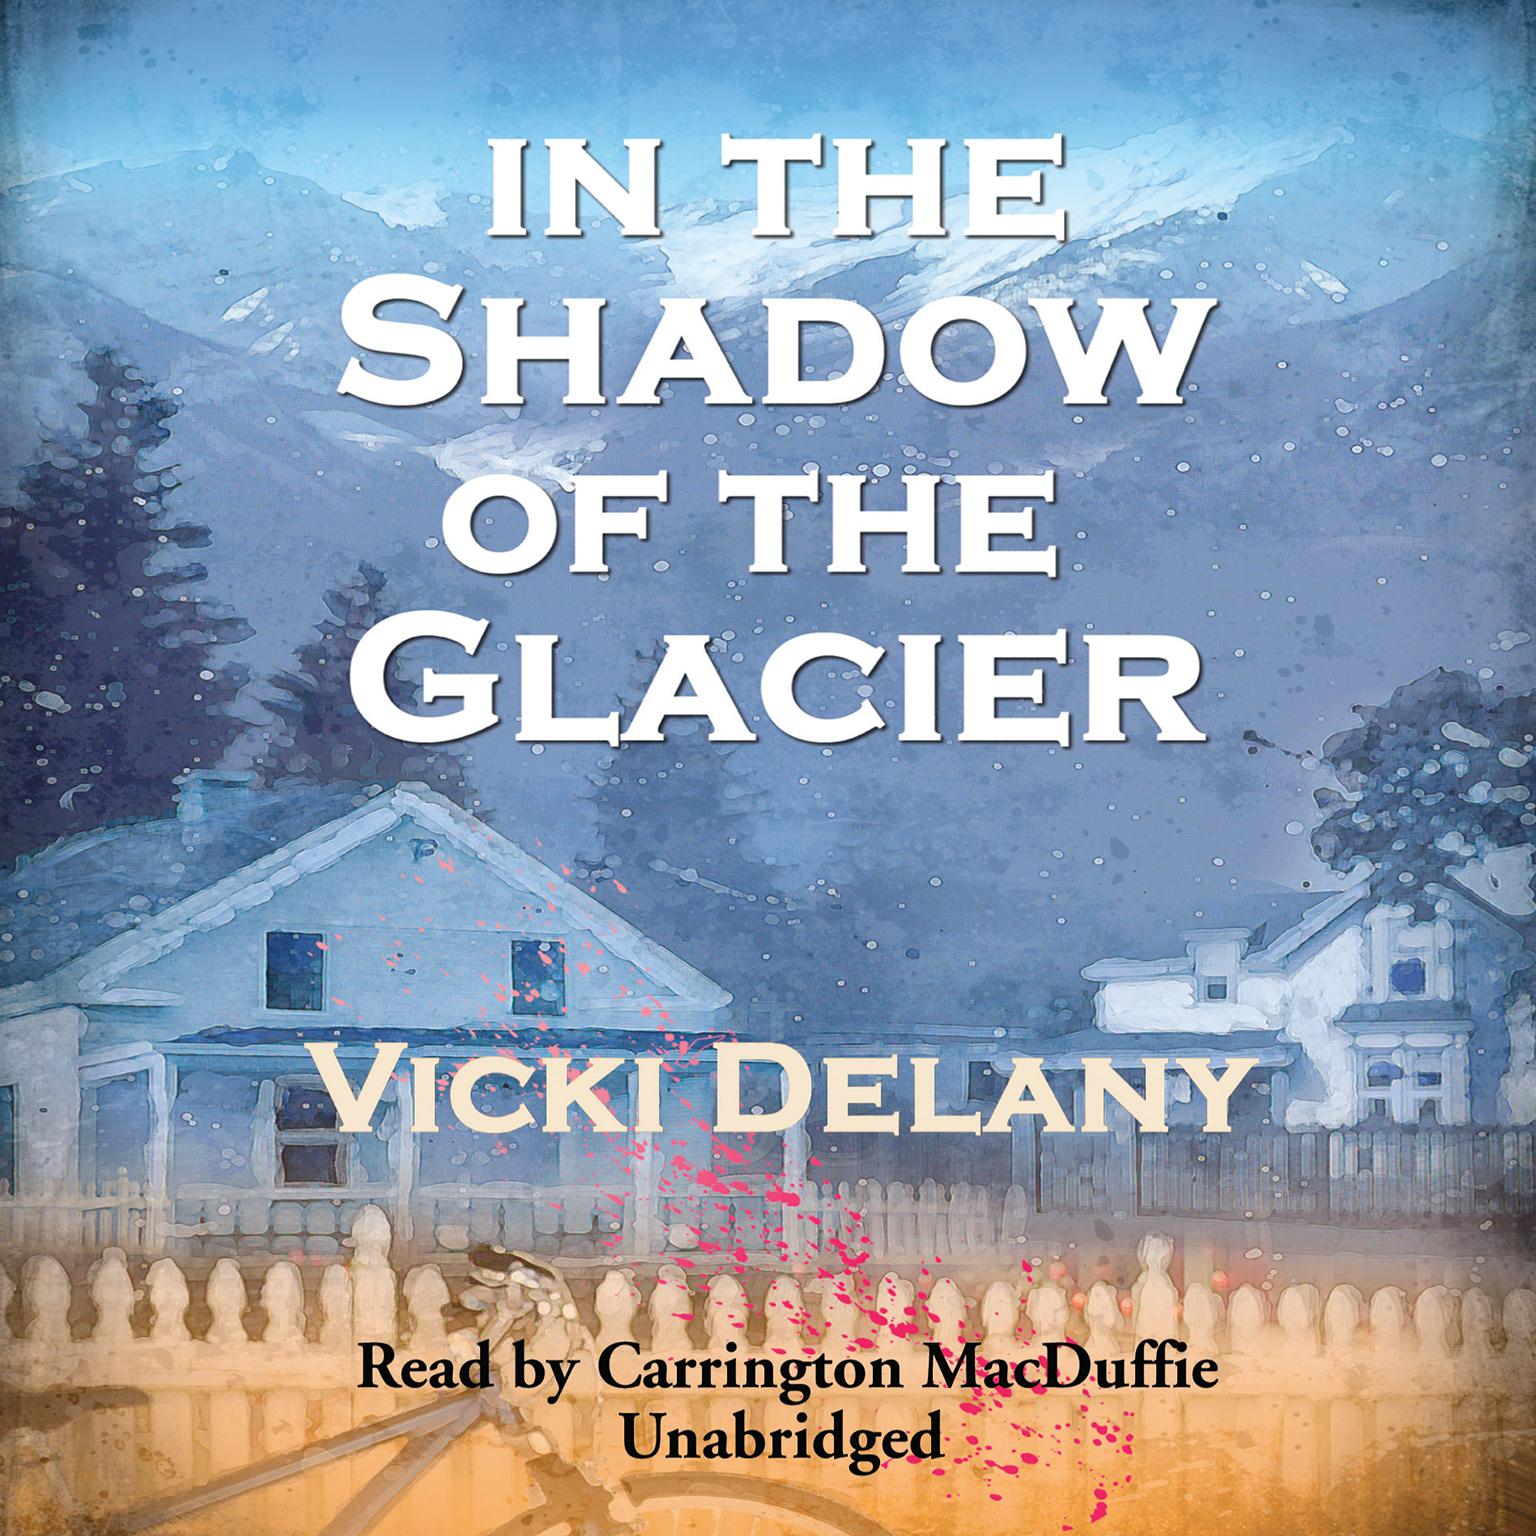 In the Shadow of the Glacier Audiobook, by Vicki Delany